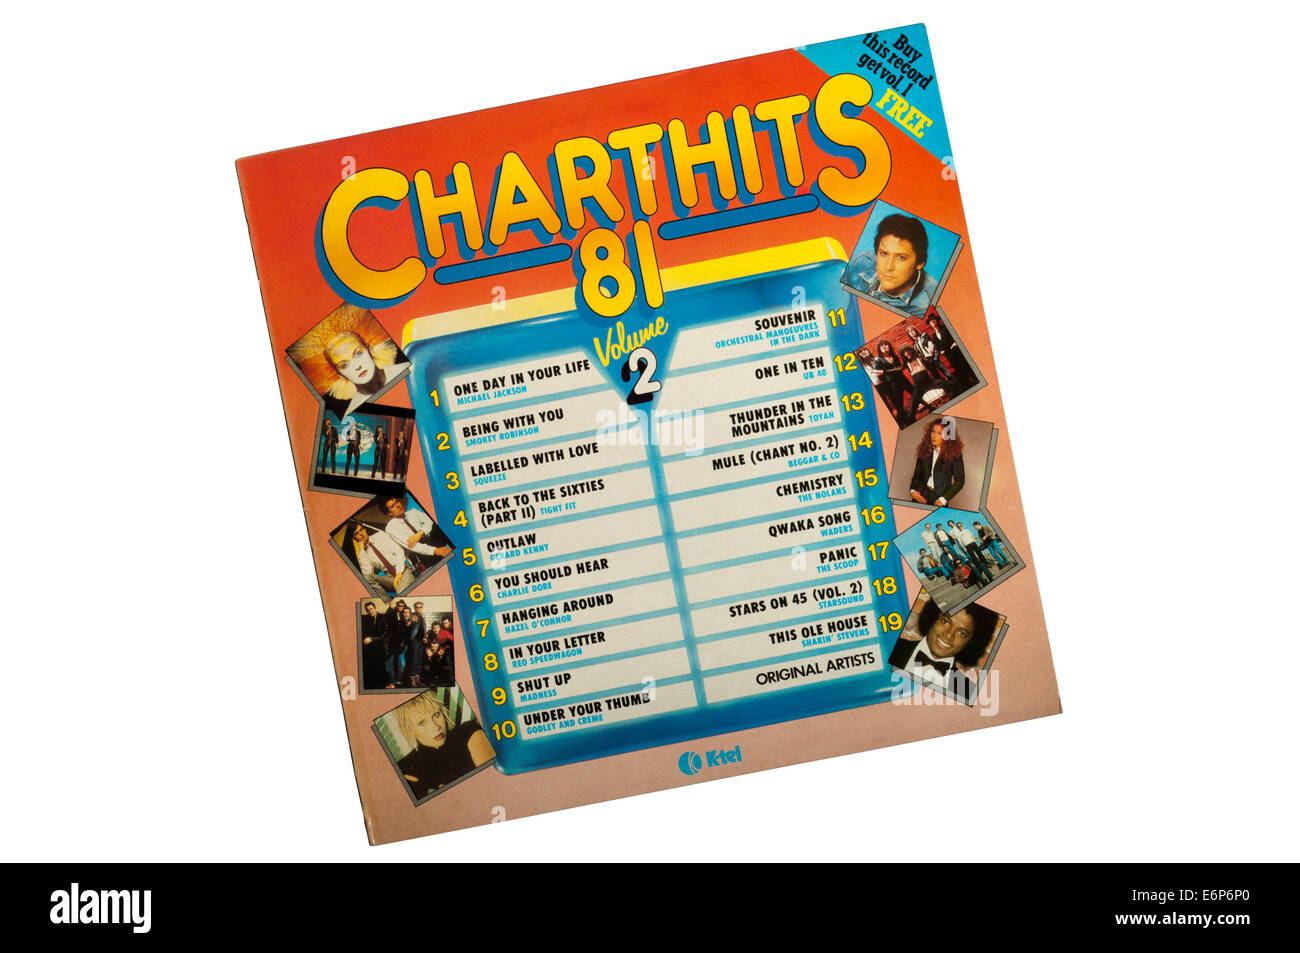 Chart Hits 81 Volume 2 was a compilation album released by K-Tel in 1981. Stock Photo